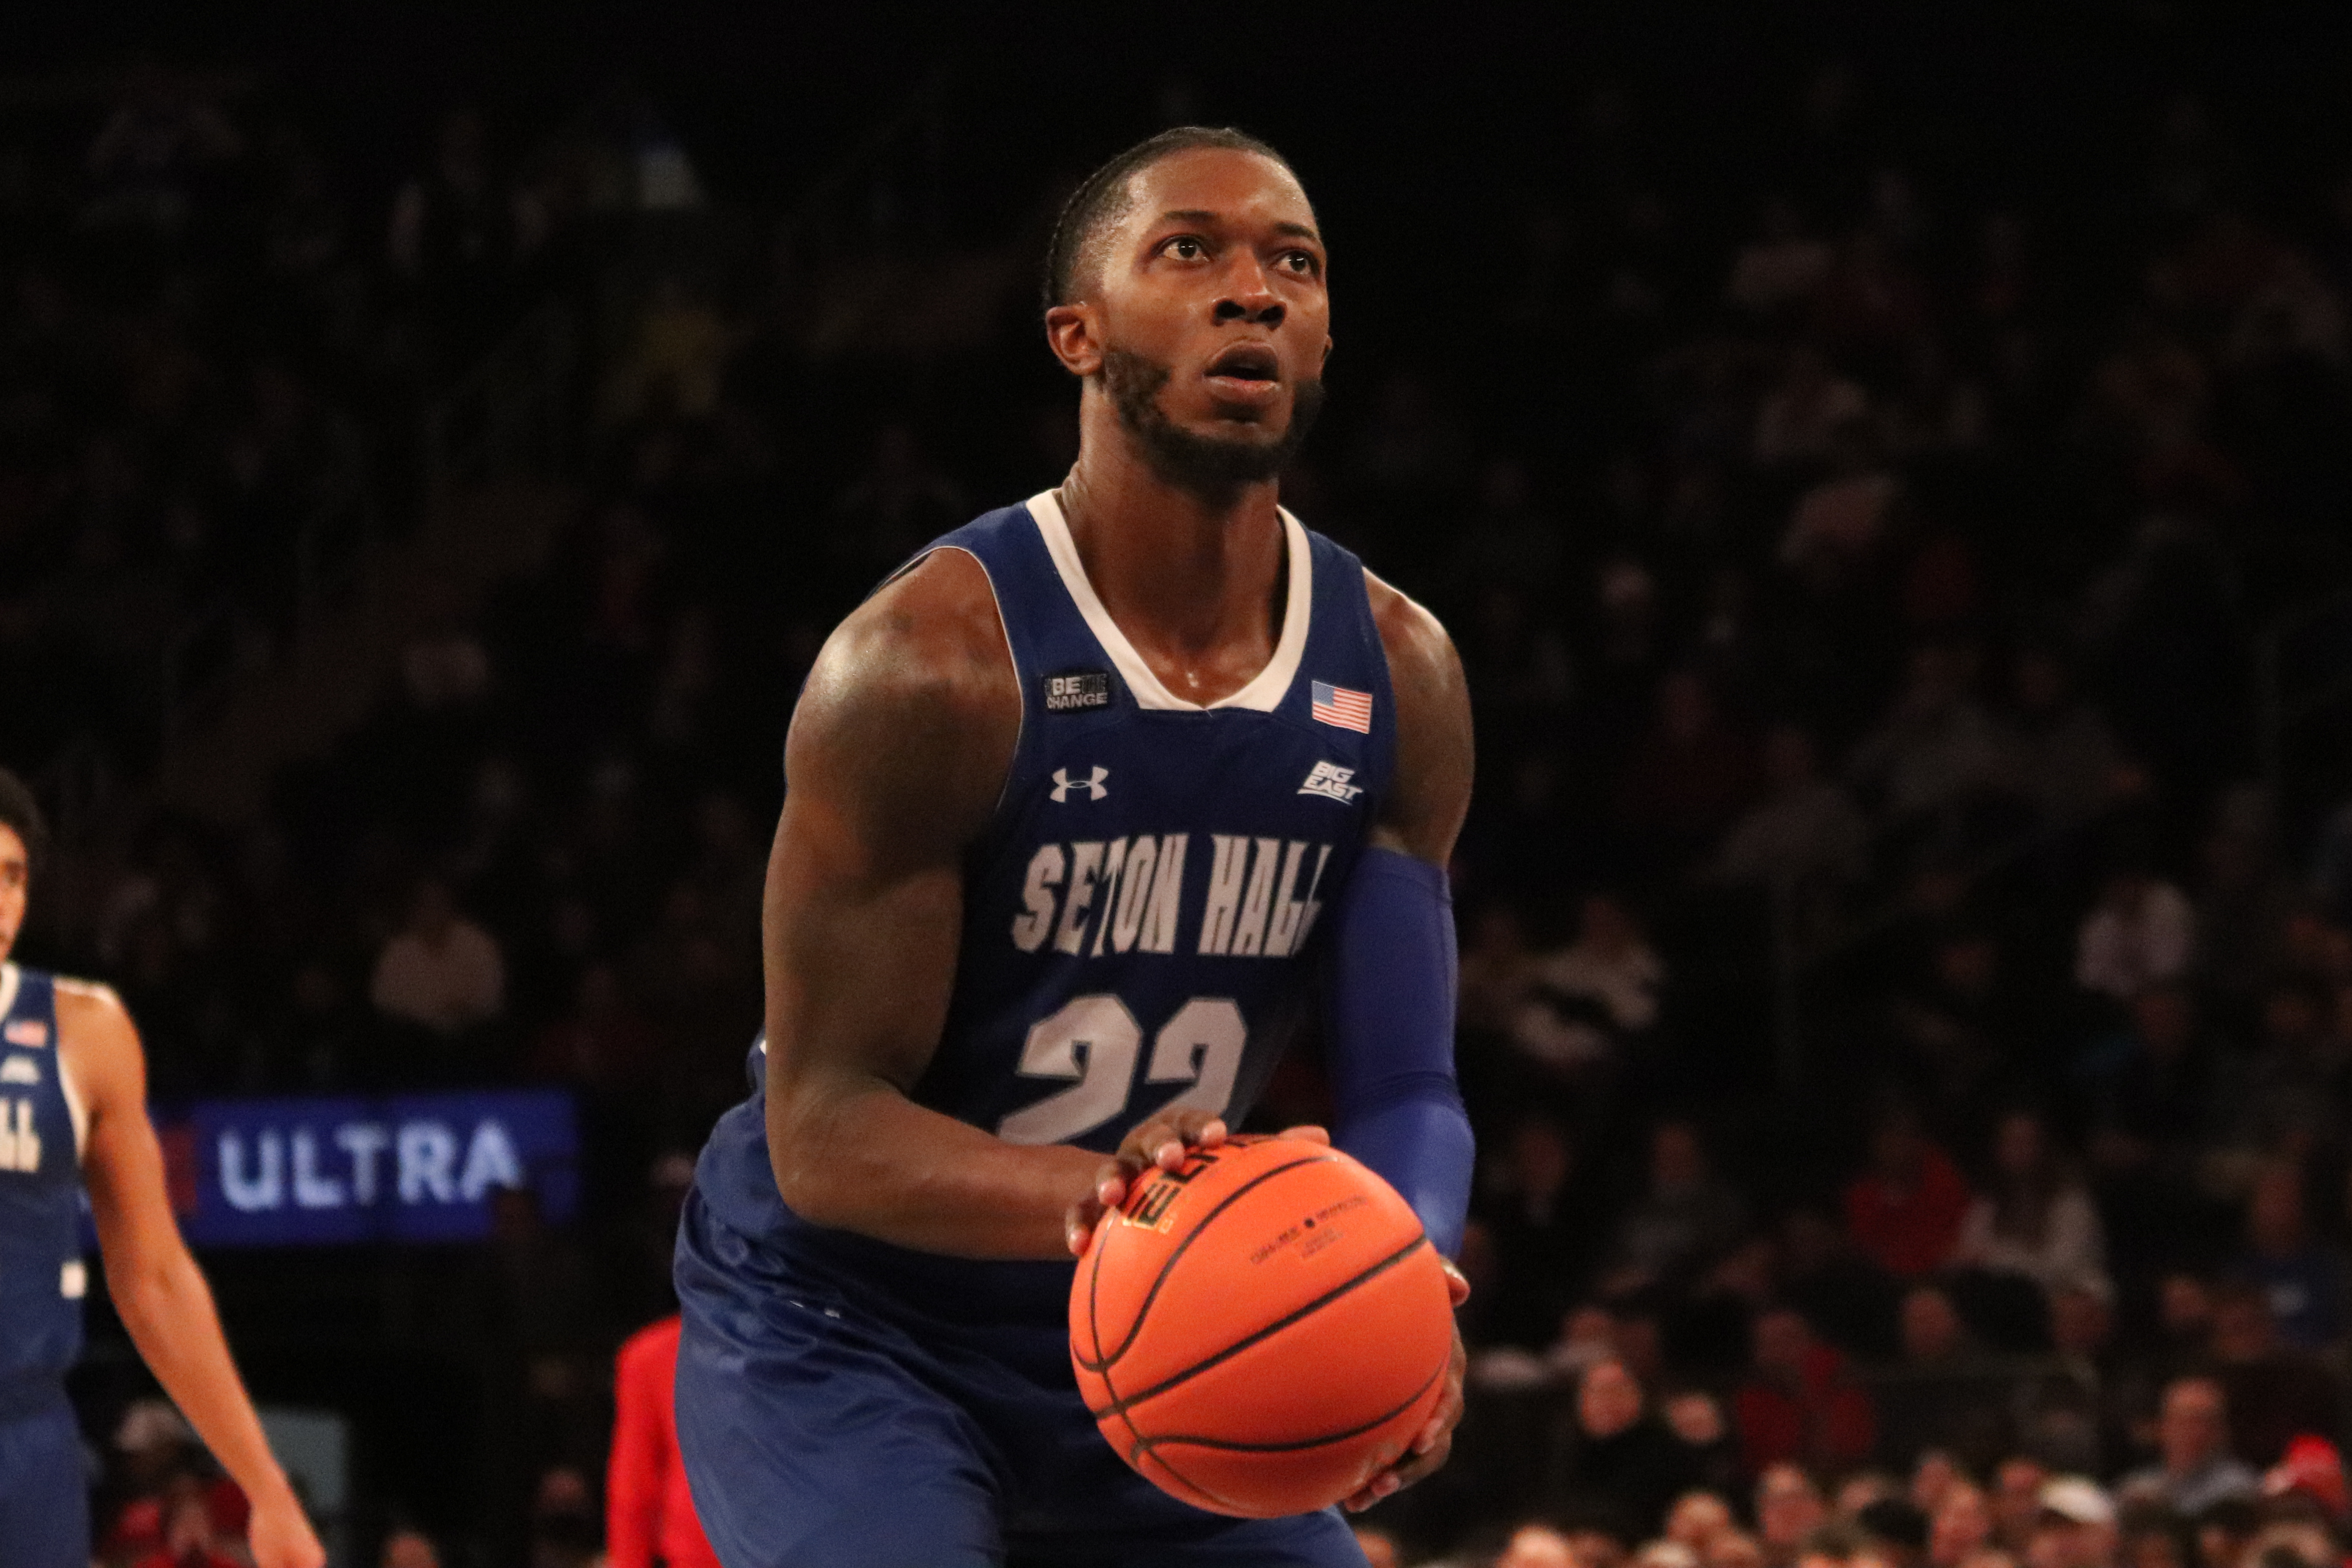 Seton Hall's Myles Cale looks to shoot a free throw during an away game at St. John's.